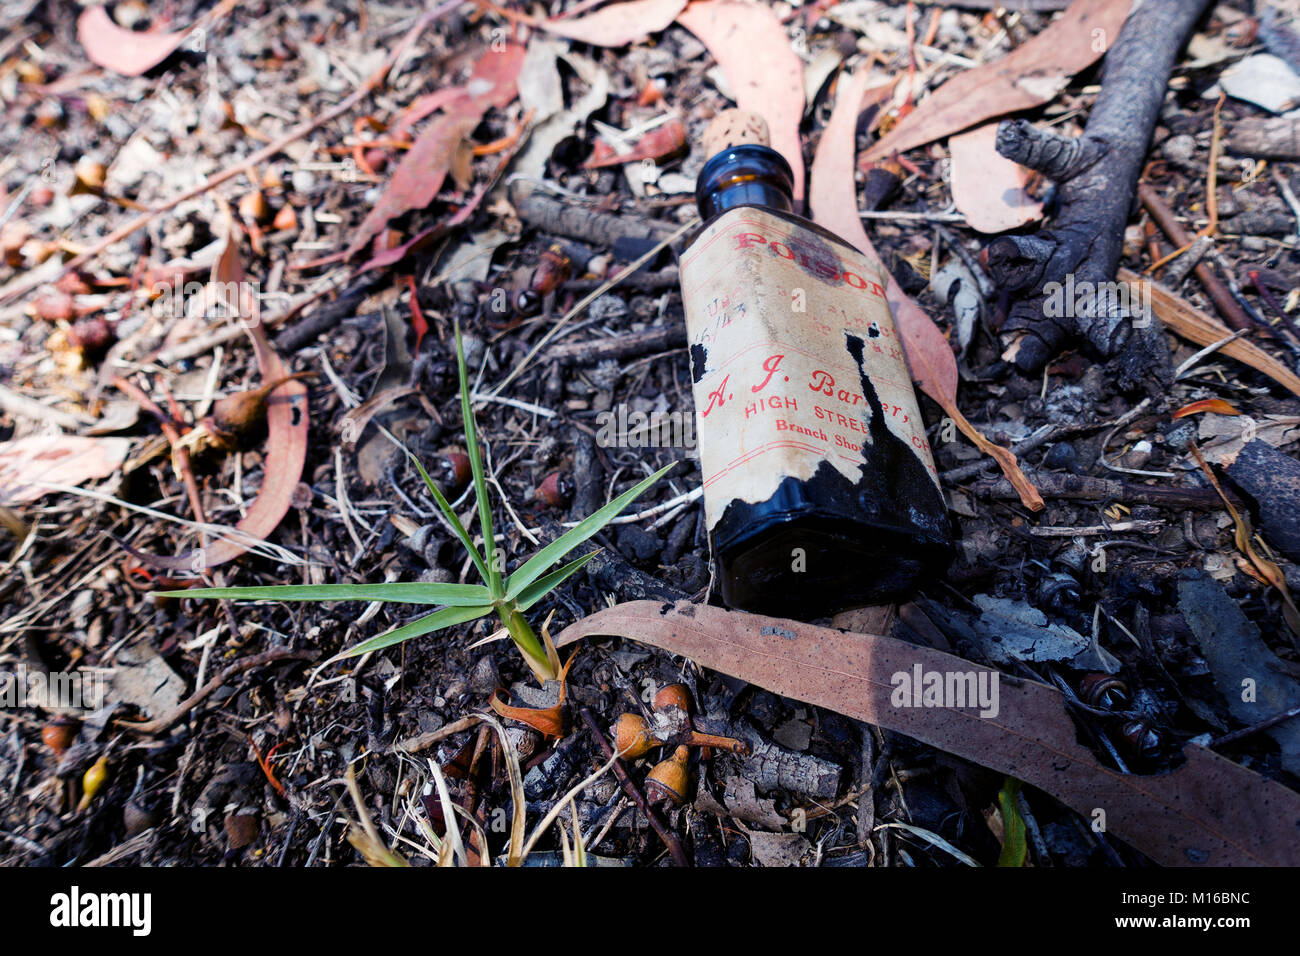 Australian poison bottle with old label Stock Photo